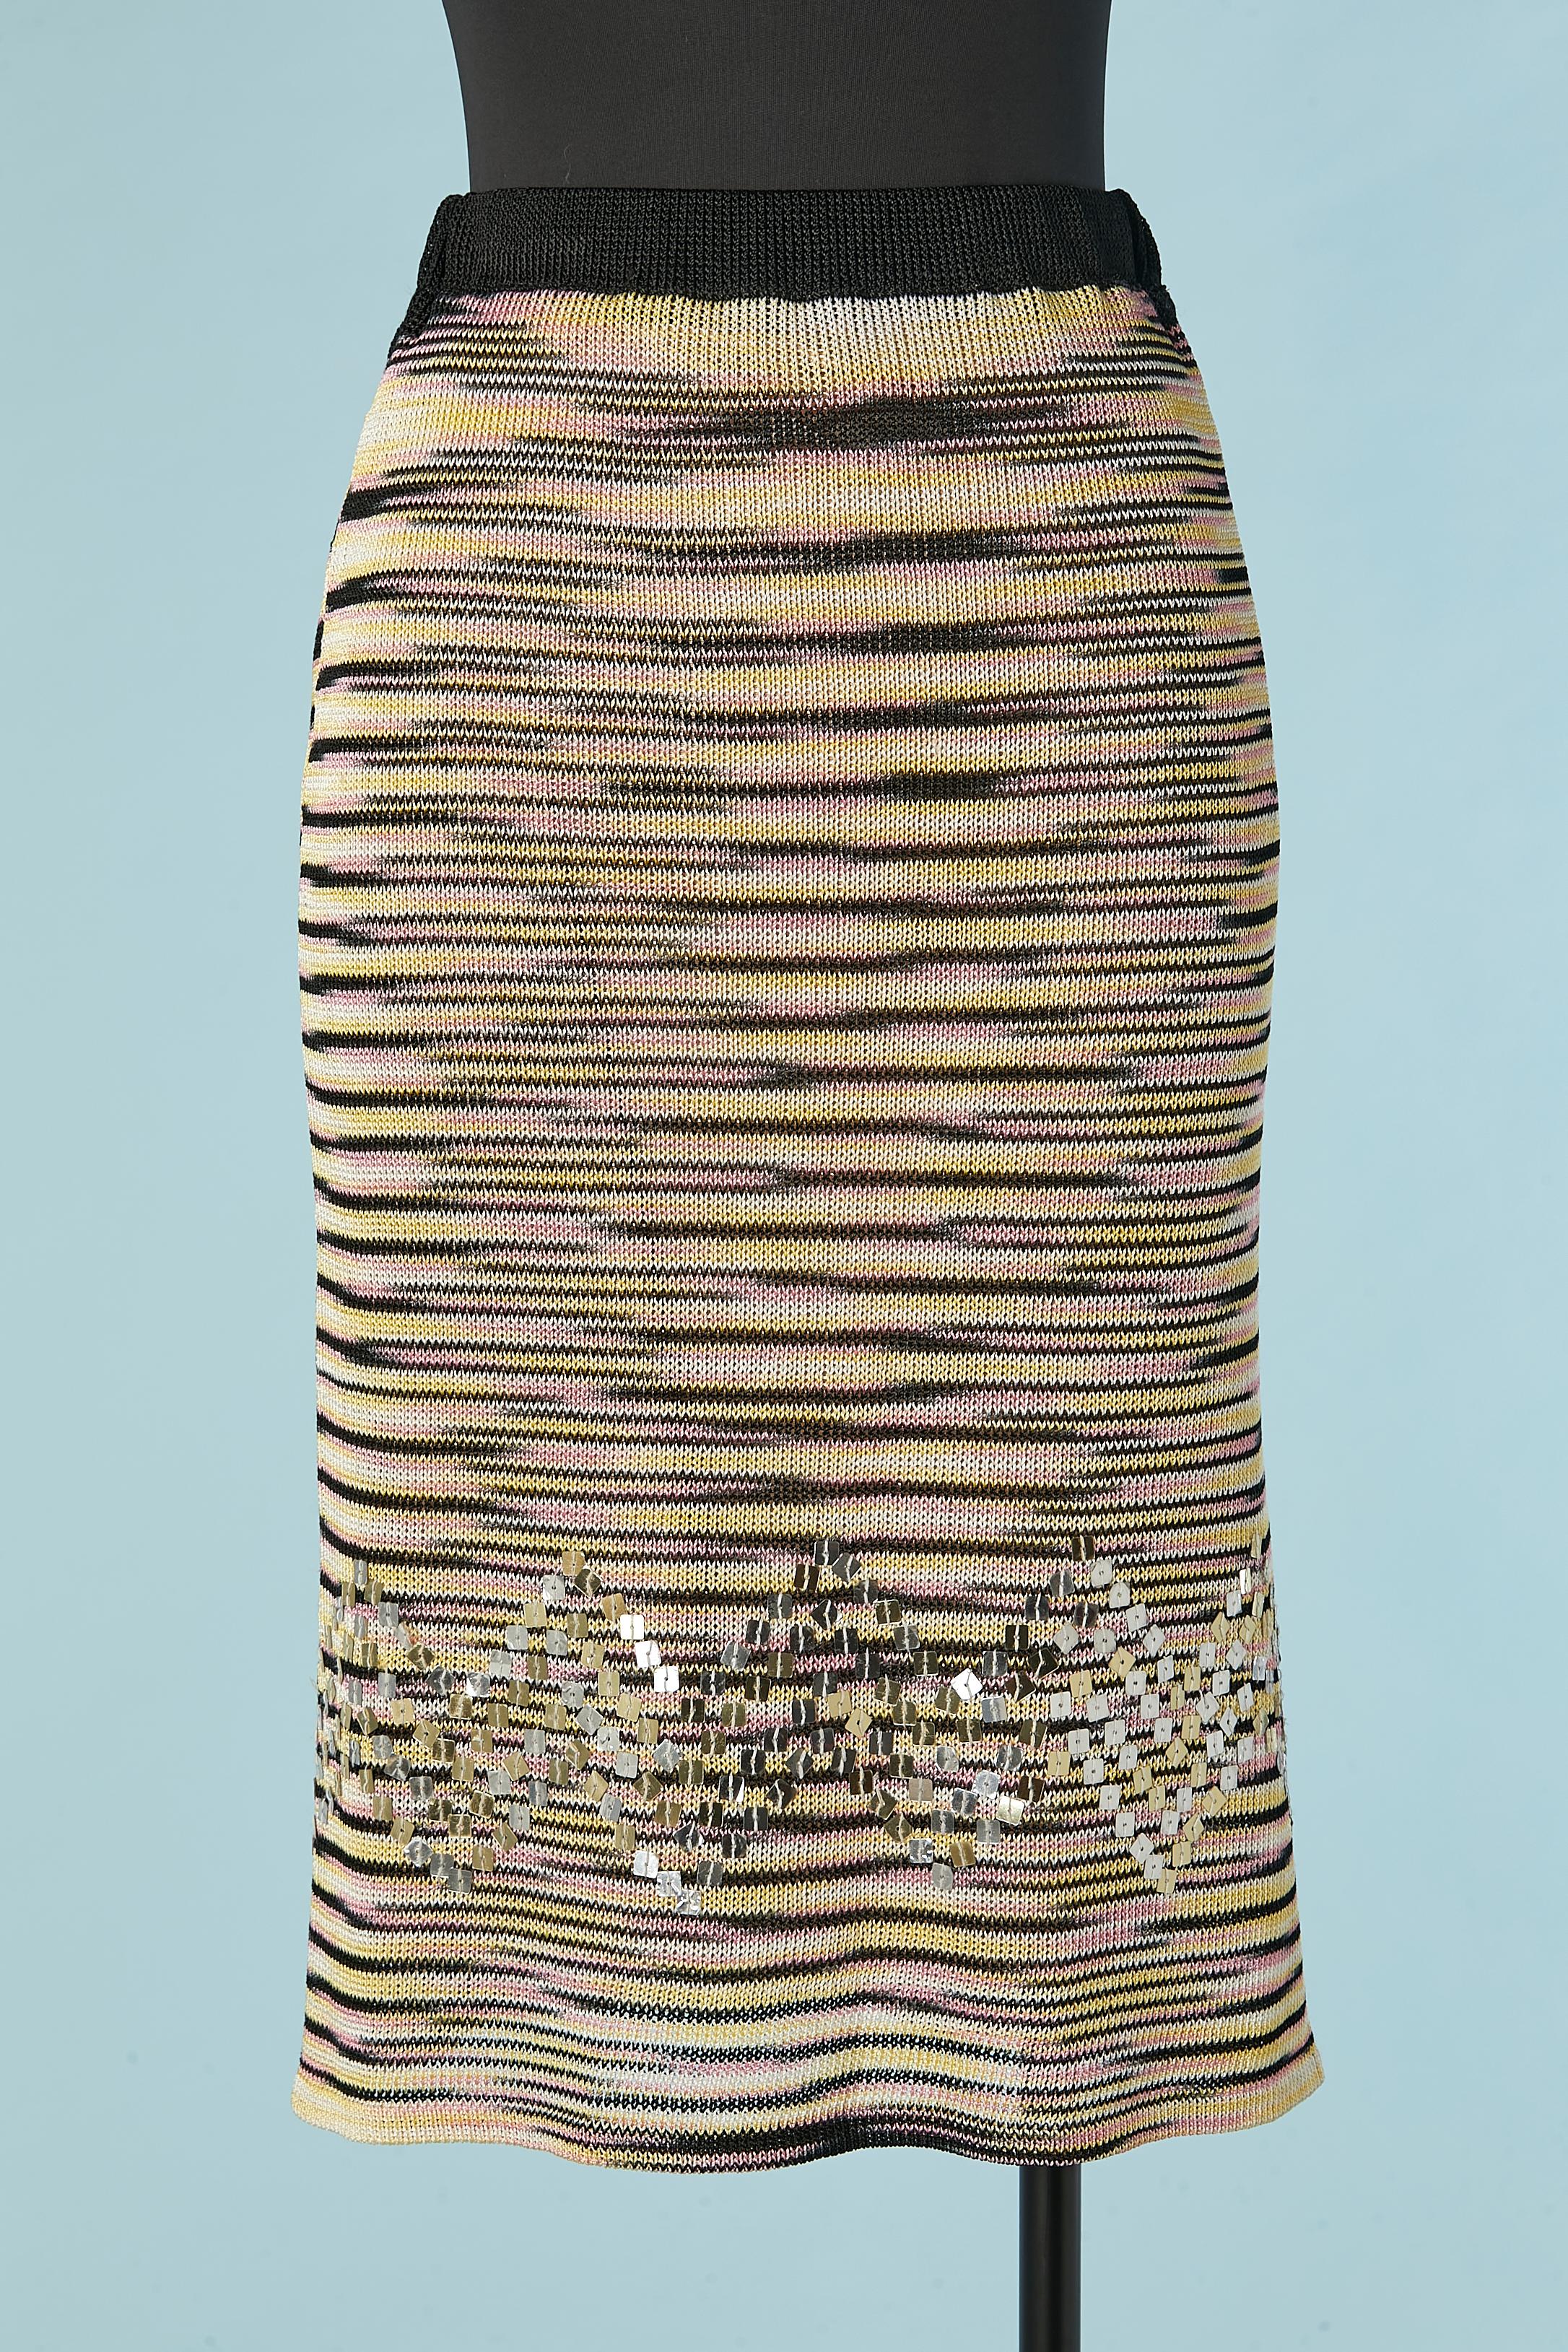 Tank top and skirt ensemble in rayon knit with sequin embellishment M Missoni  For Sale 3